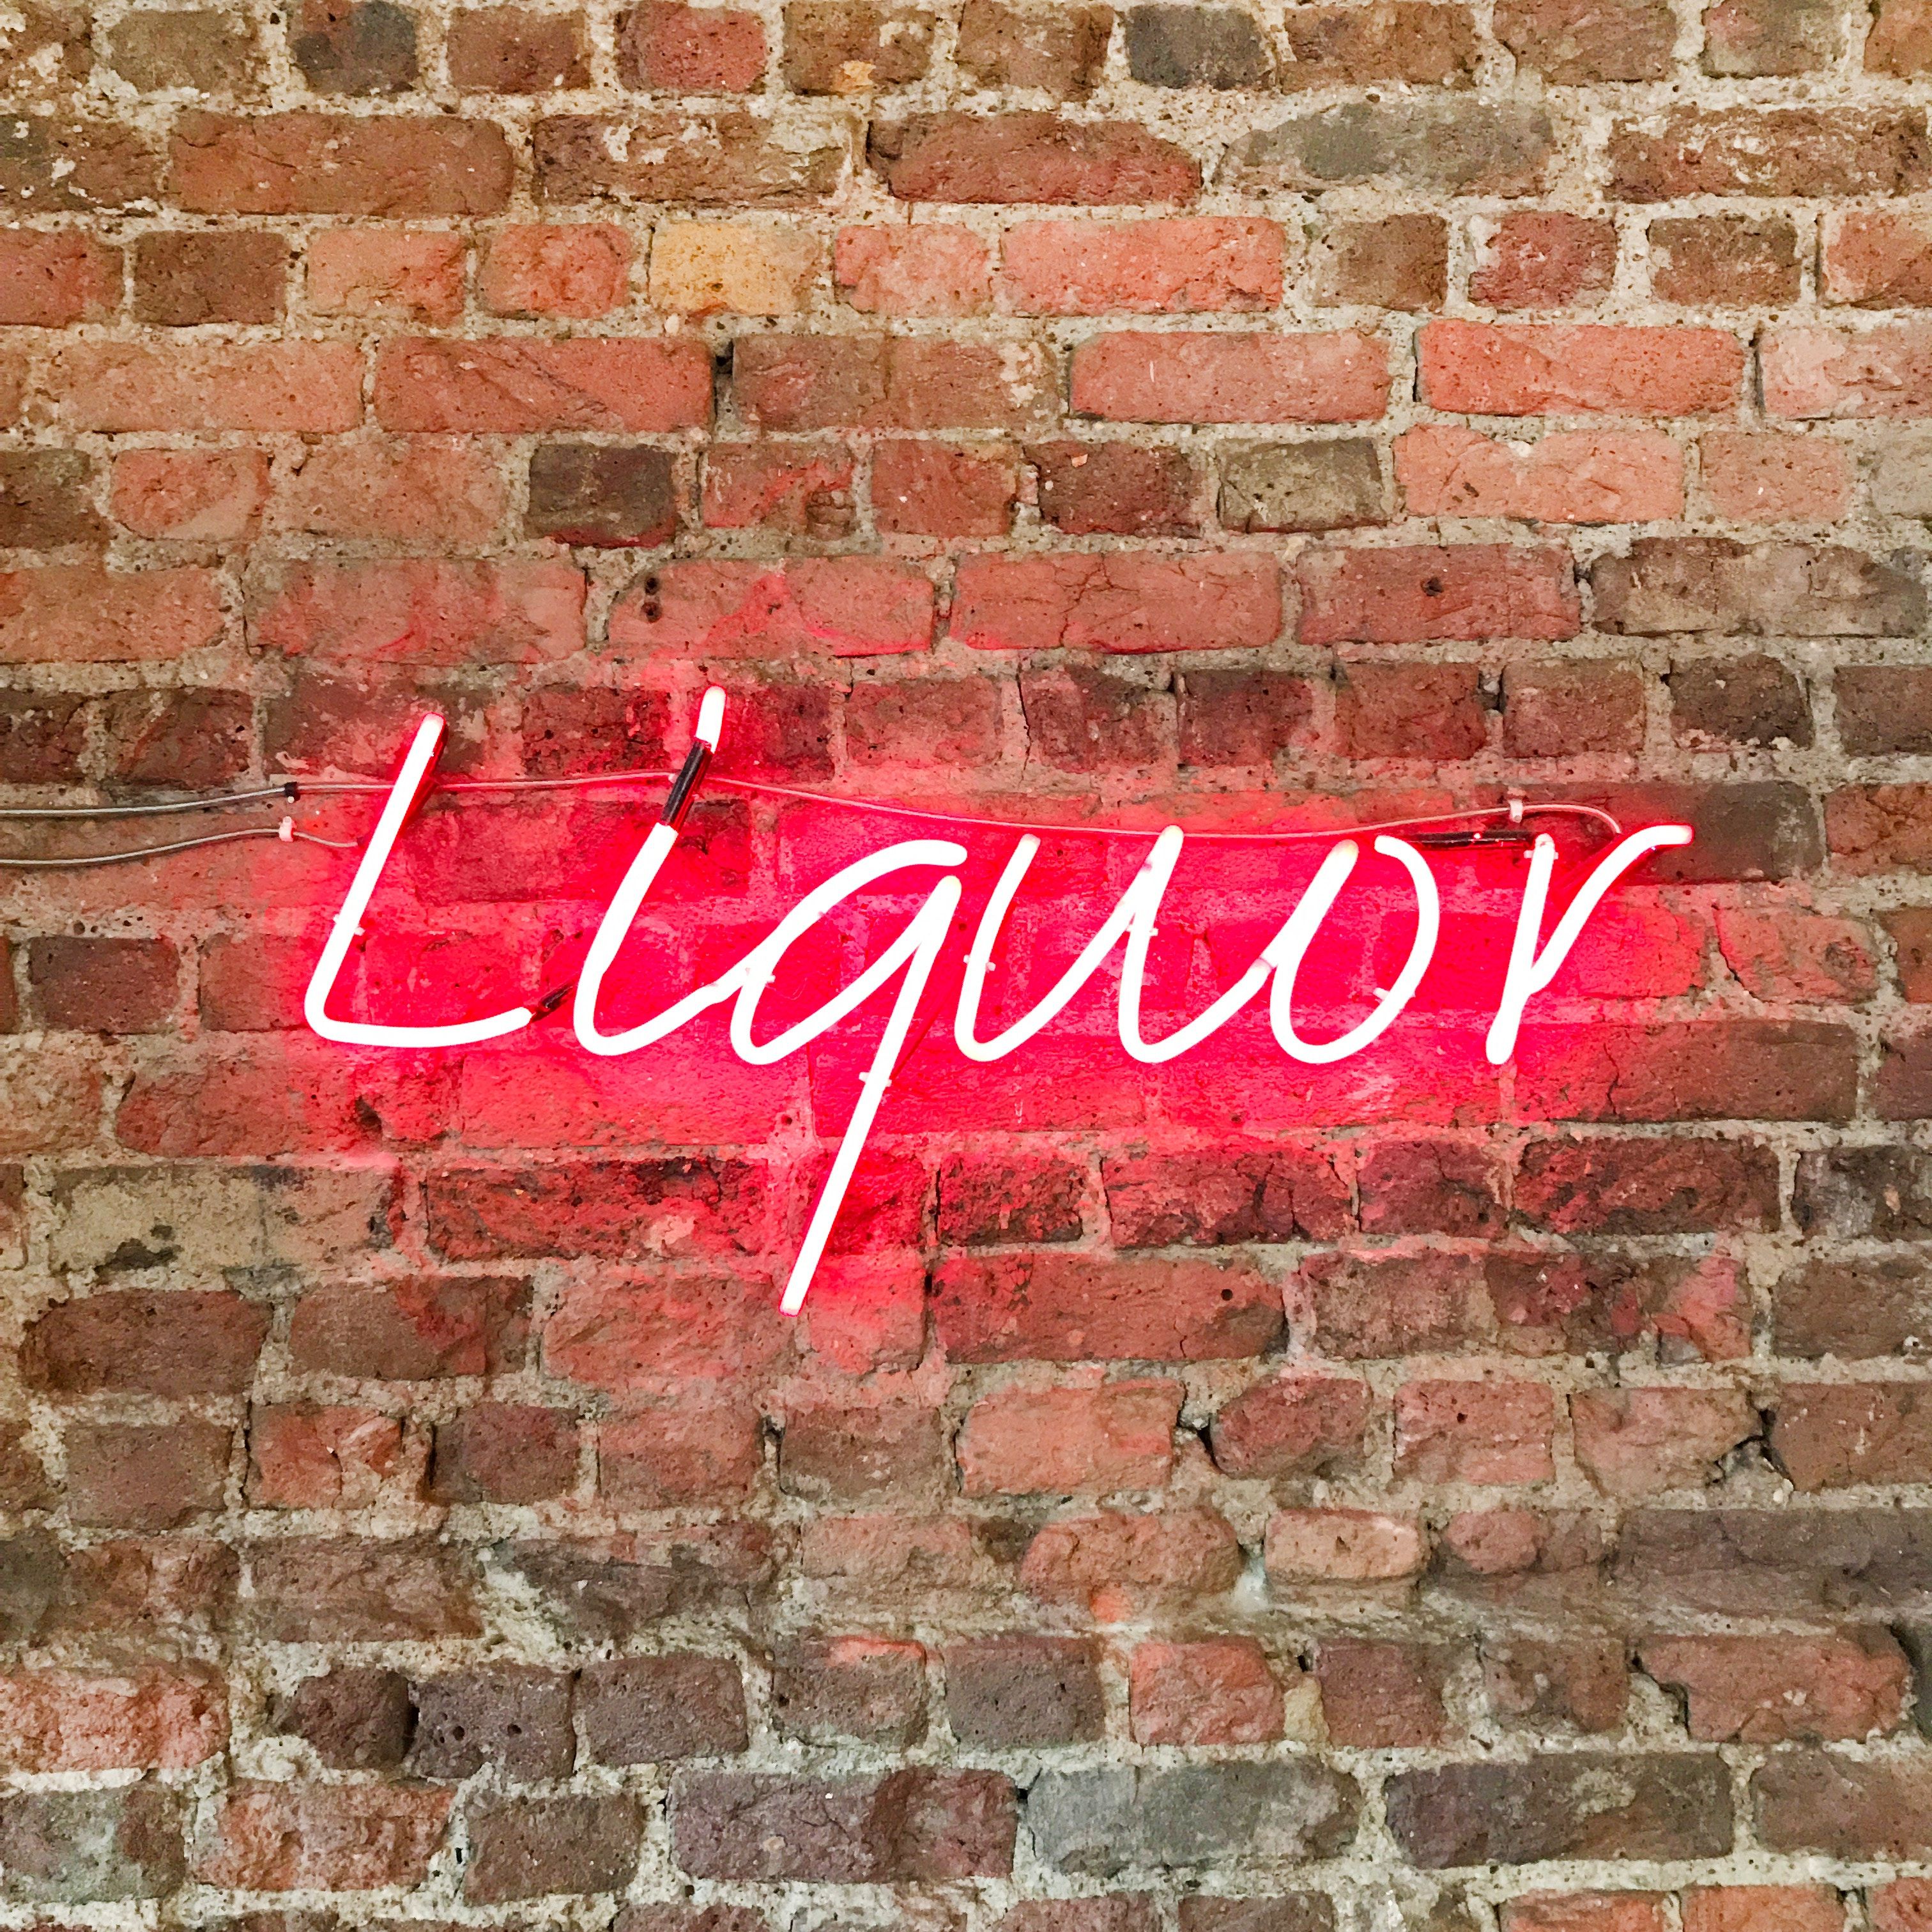 3024x3024 #illumination, #illuminated, #party, #neon sign, #restaurant, #background, #sign, #brick wall, #red neon, #lounge, #neon, #booze, #light sign, #red, #wall, #liquor, #fun, #brick, #PNG image, #cantina, #red light. Mocah HD Wallpaper